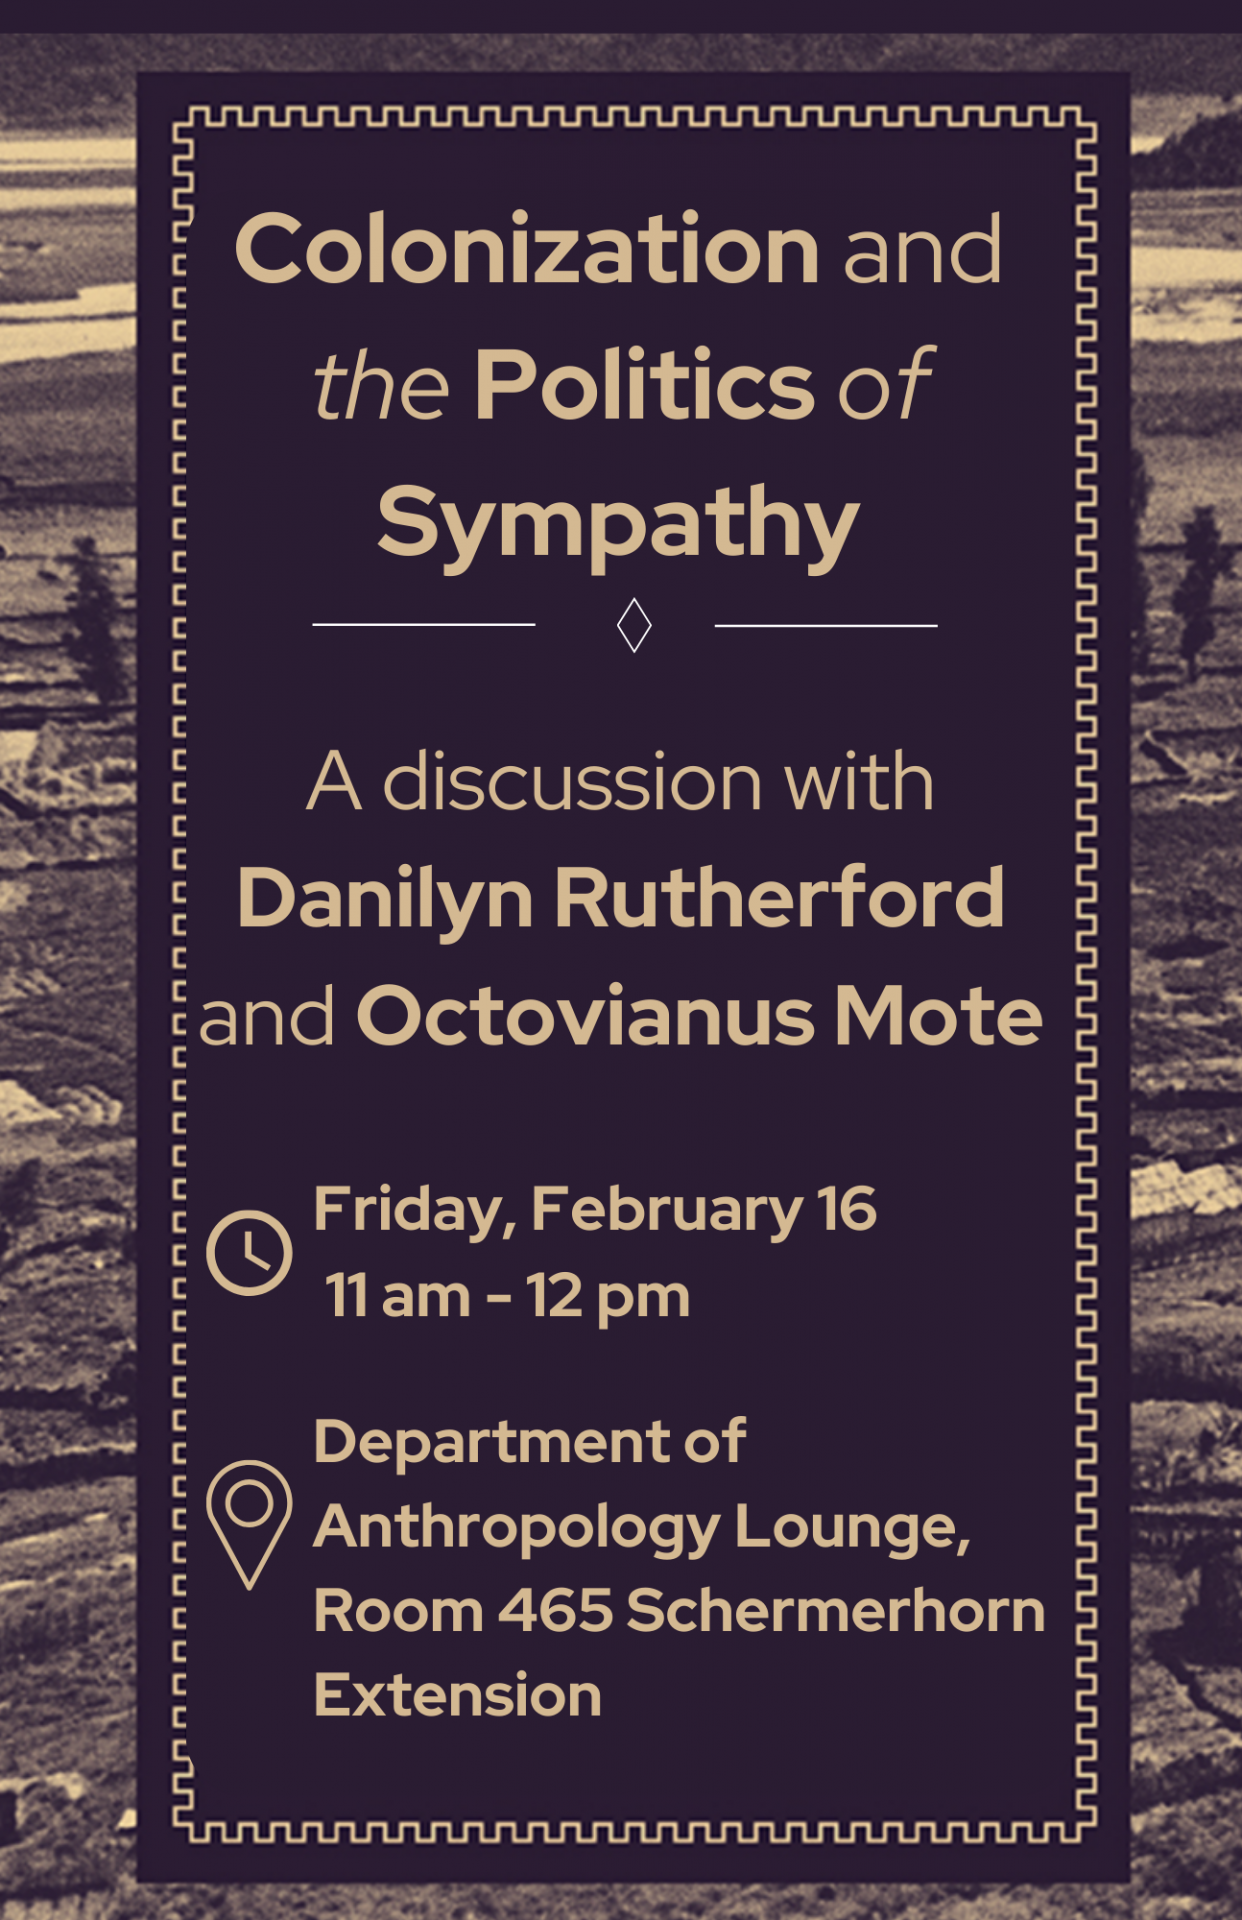 Colonization and the Politics of Sympathy flyer